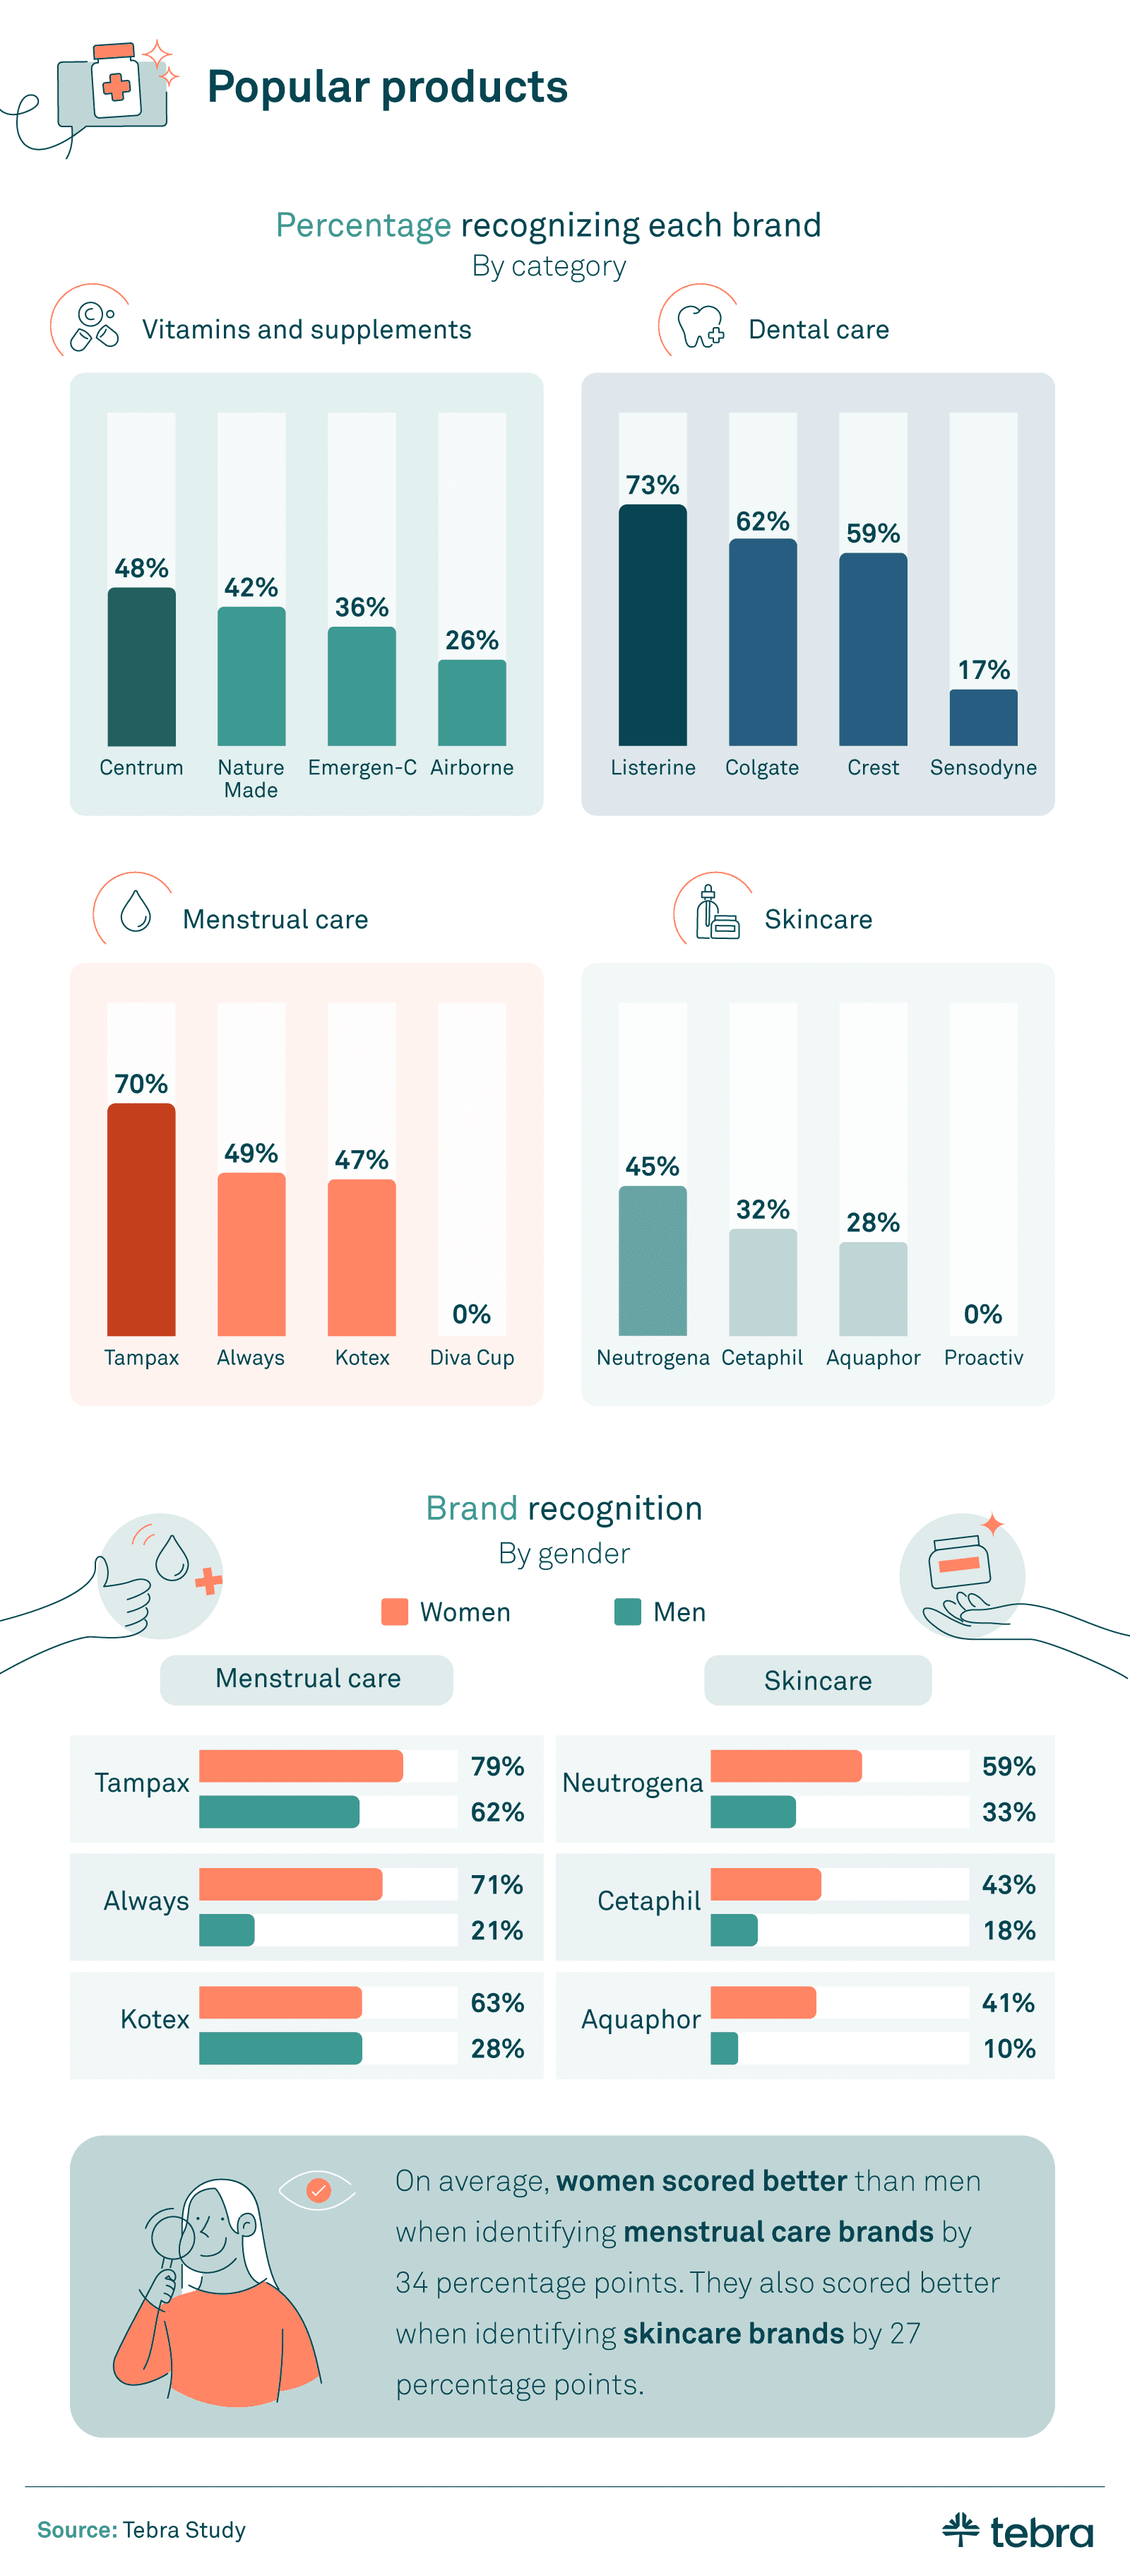 Brand recognition by gender and category